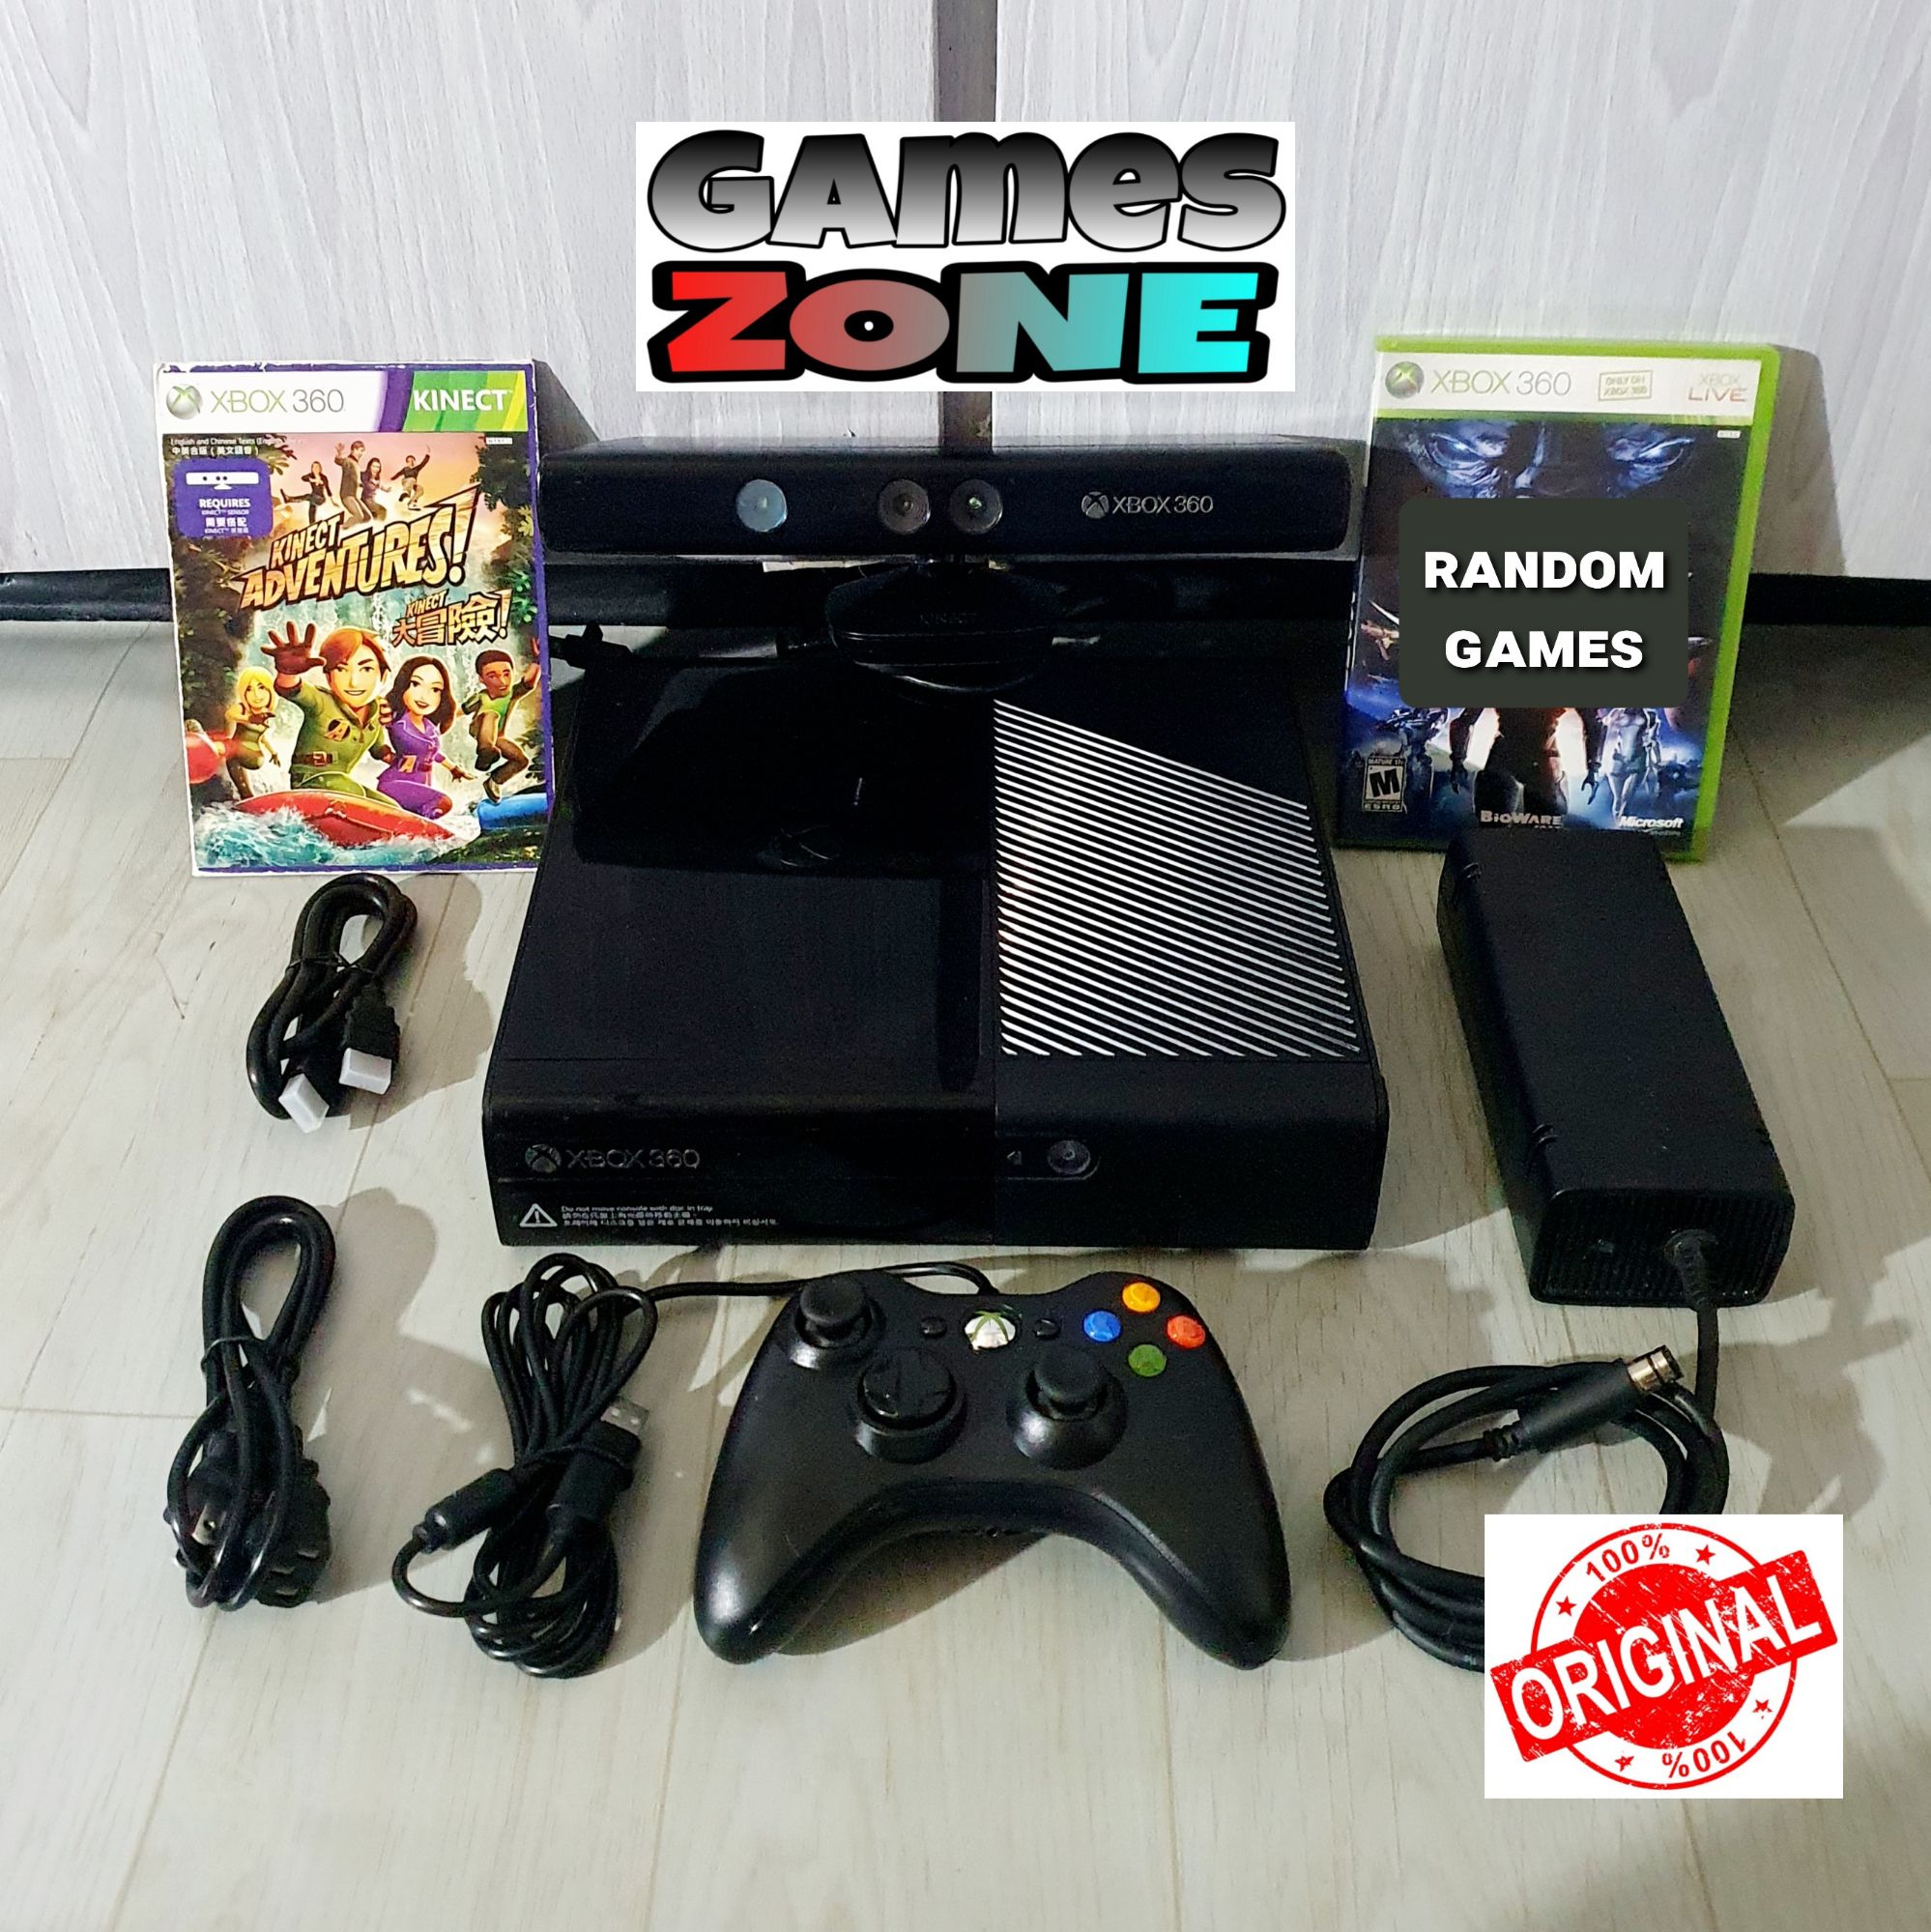 Xbox 360 Slim Console with Kinect Sensor and Free Games